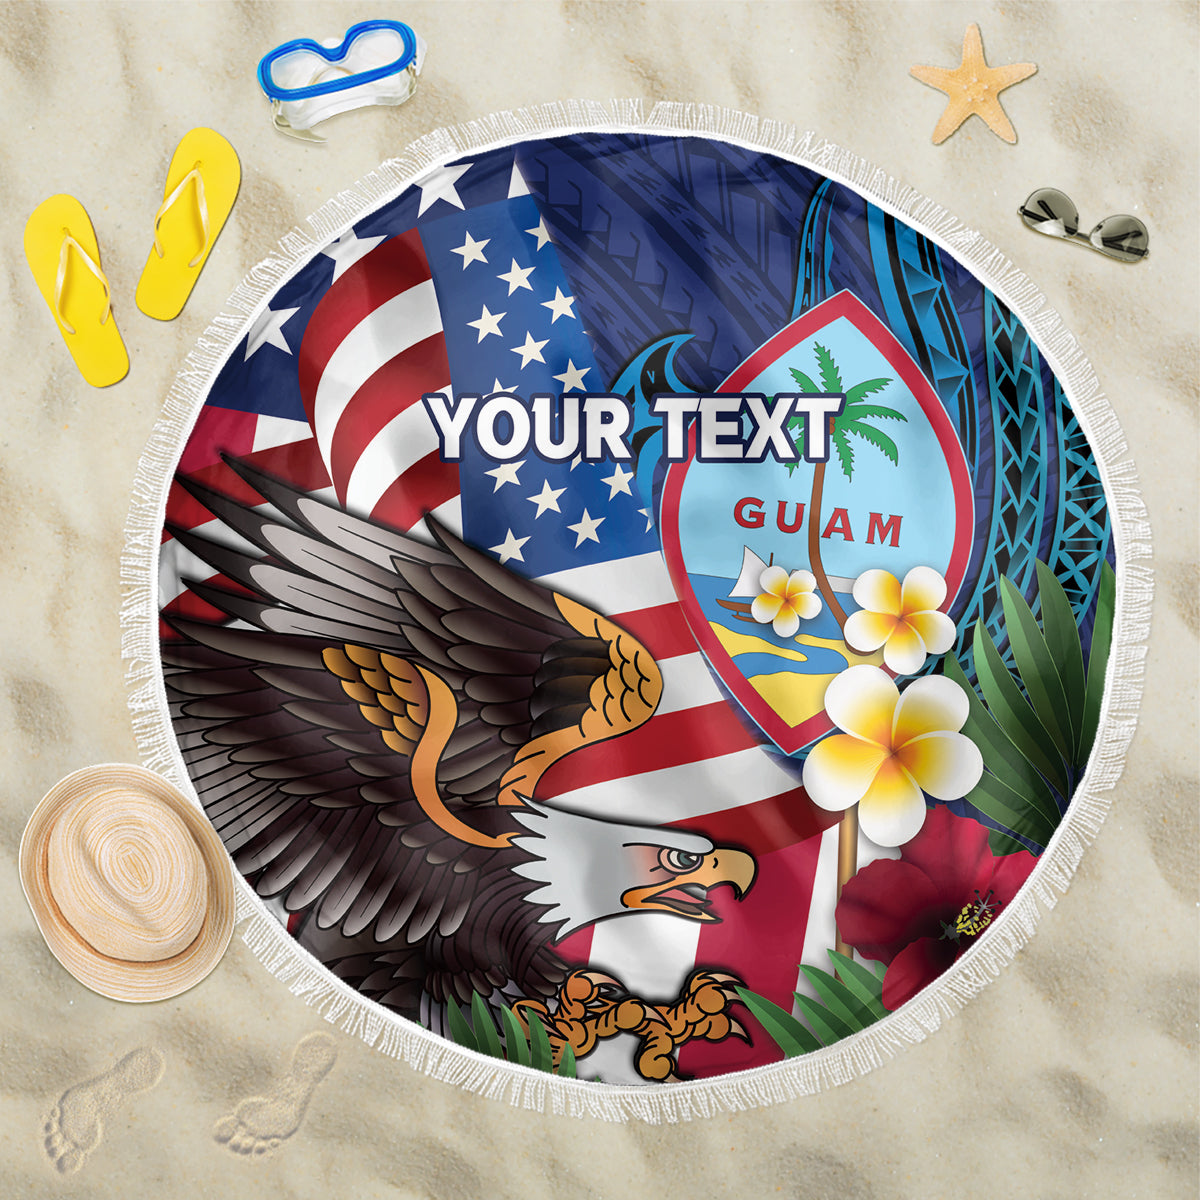 Personalised United States And Guam Beach Blanket USA Eagle With Guahan Seal Tropical Vibes